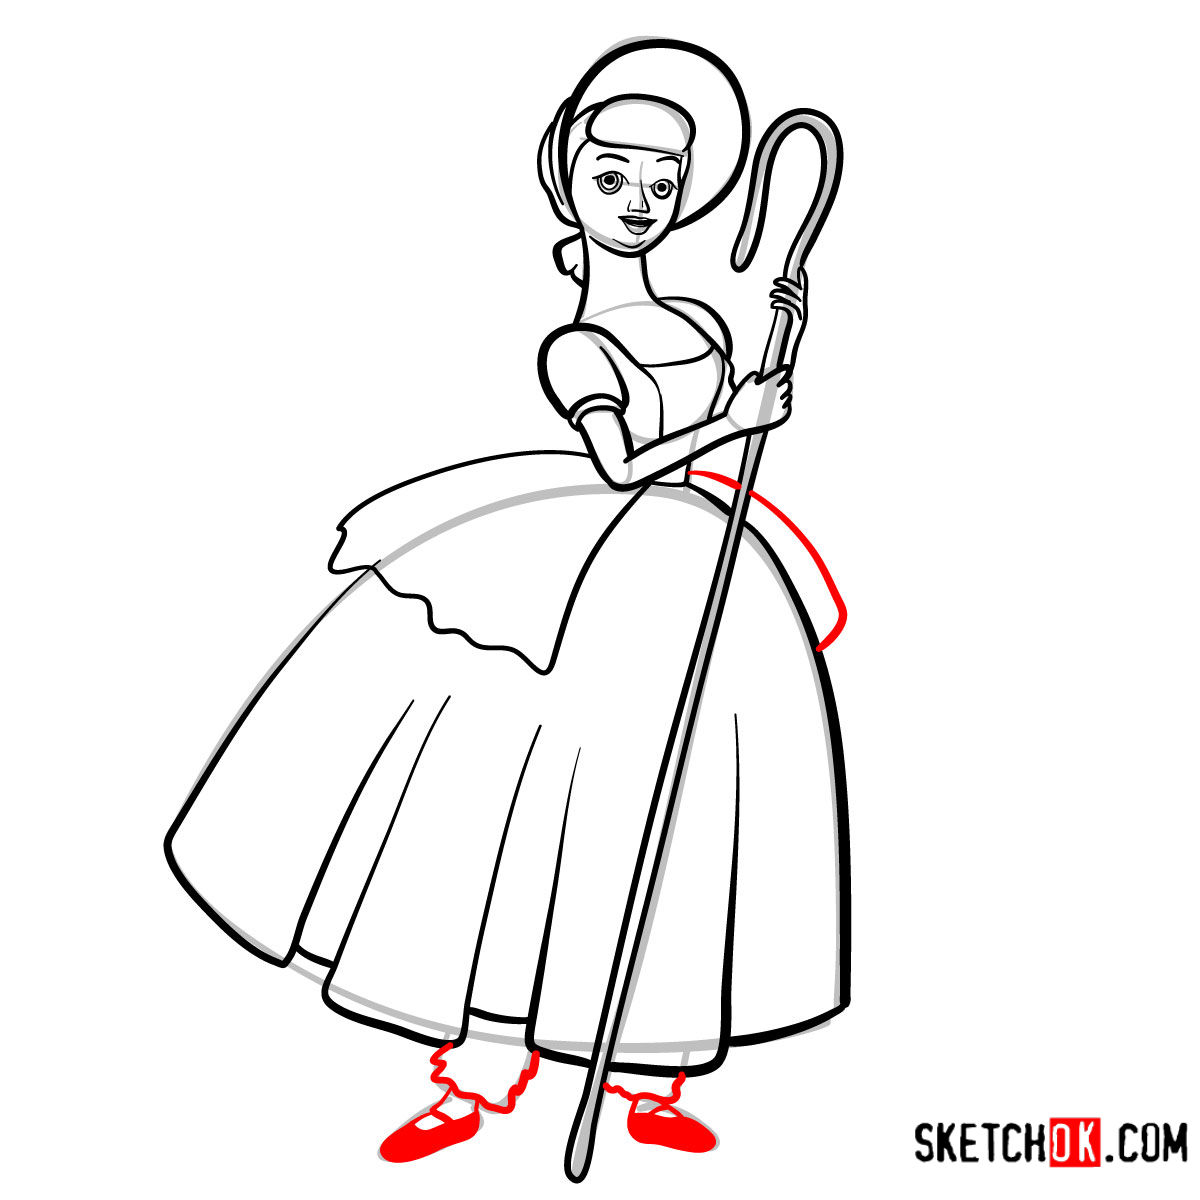 How to draw Bo Peep from Toy Story - step 11